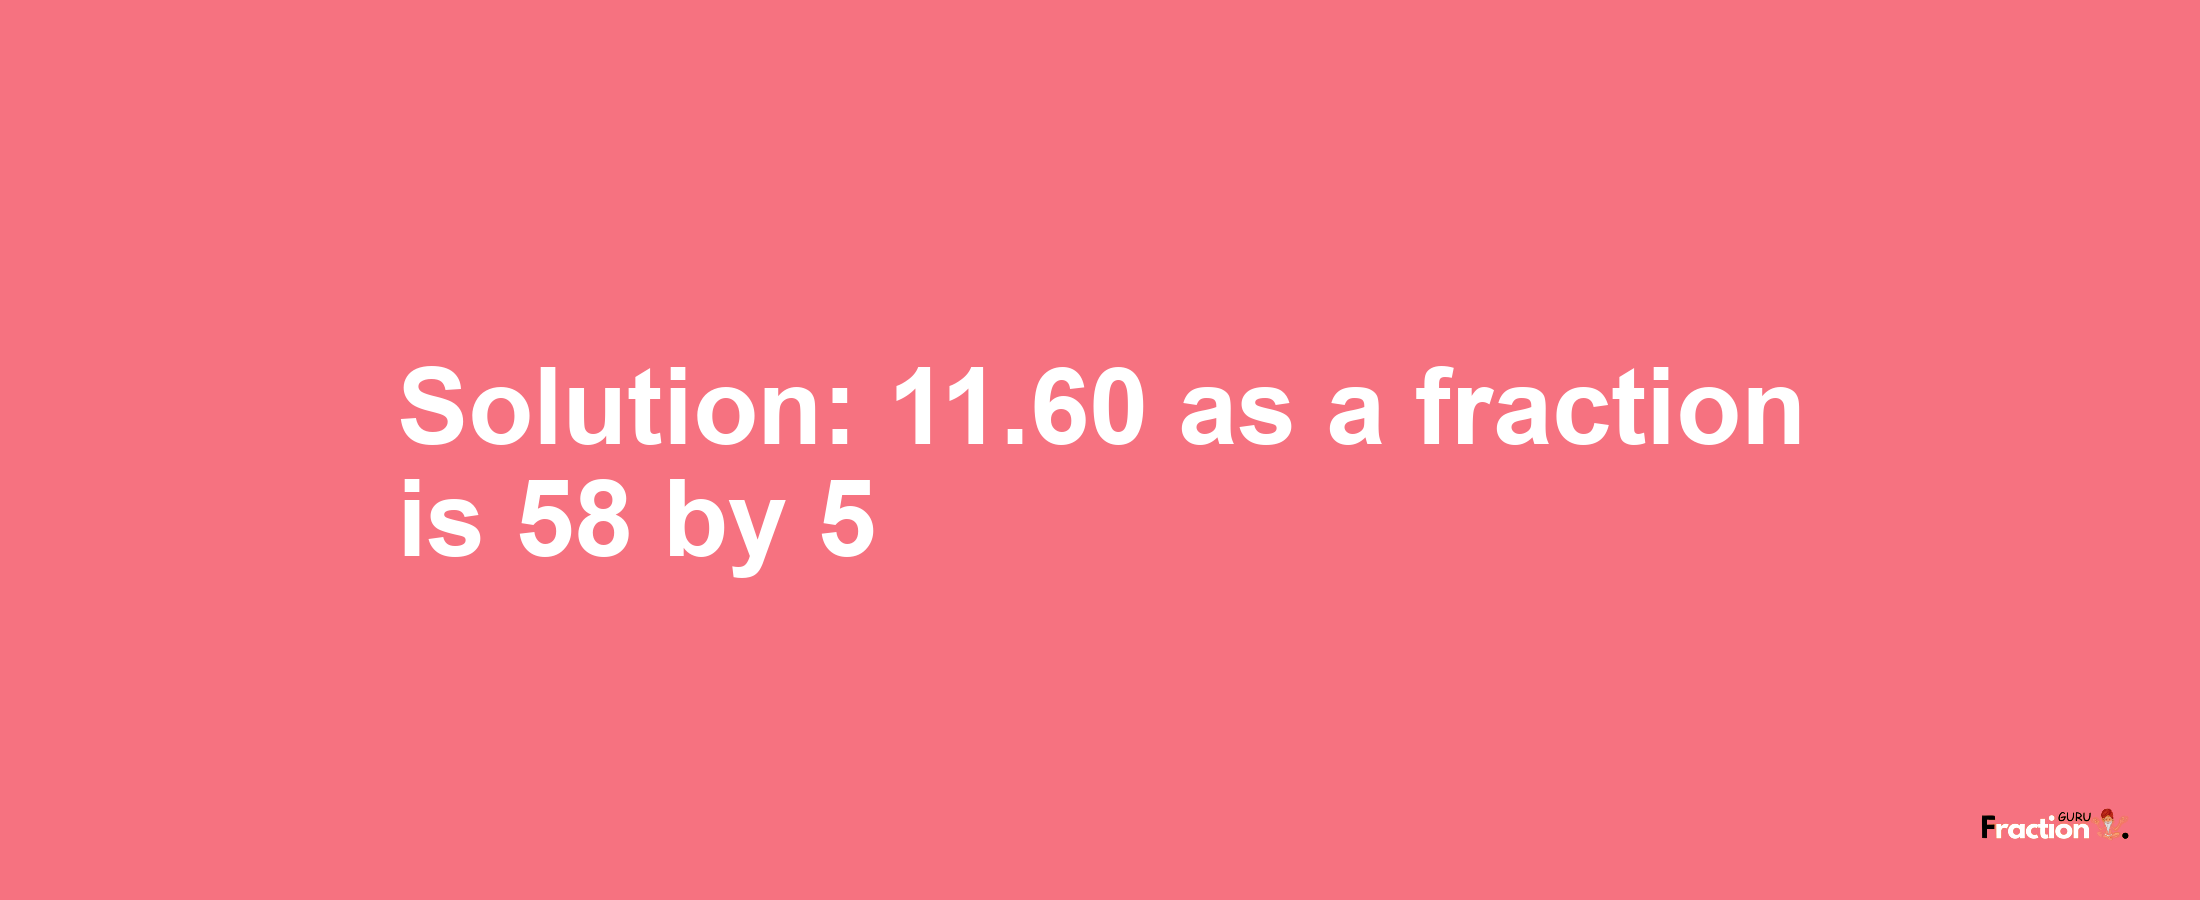 Solution:11.60 as a fraction is 58/5